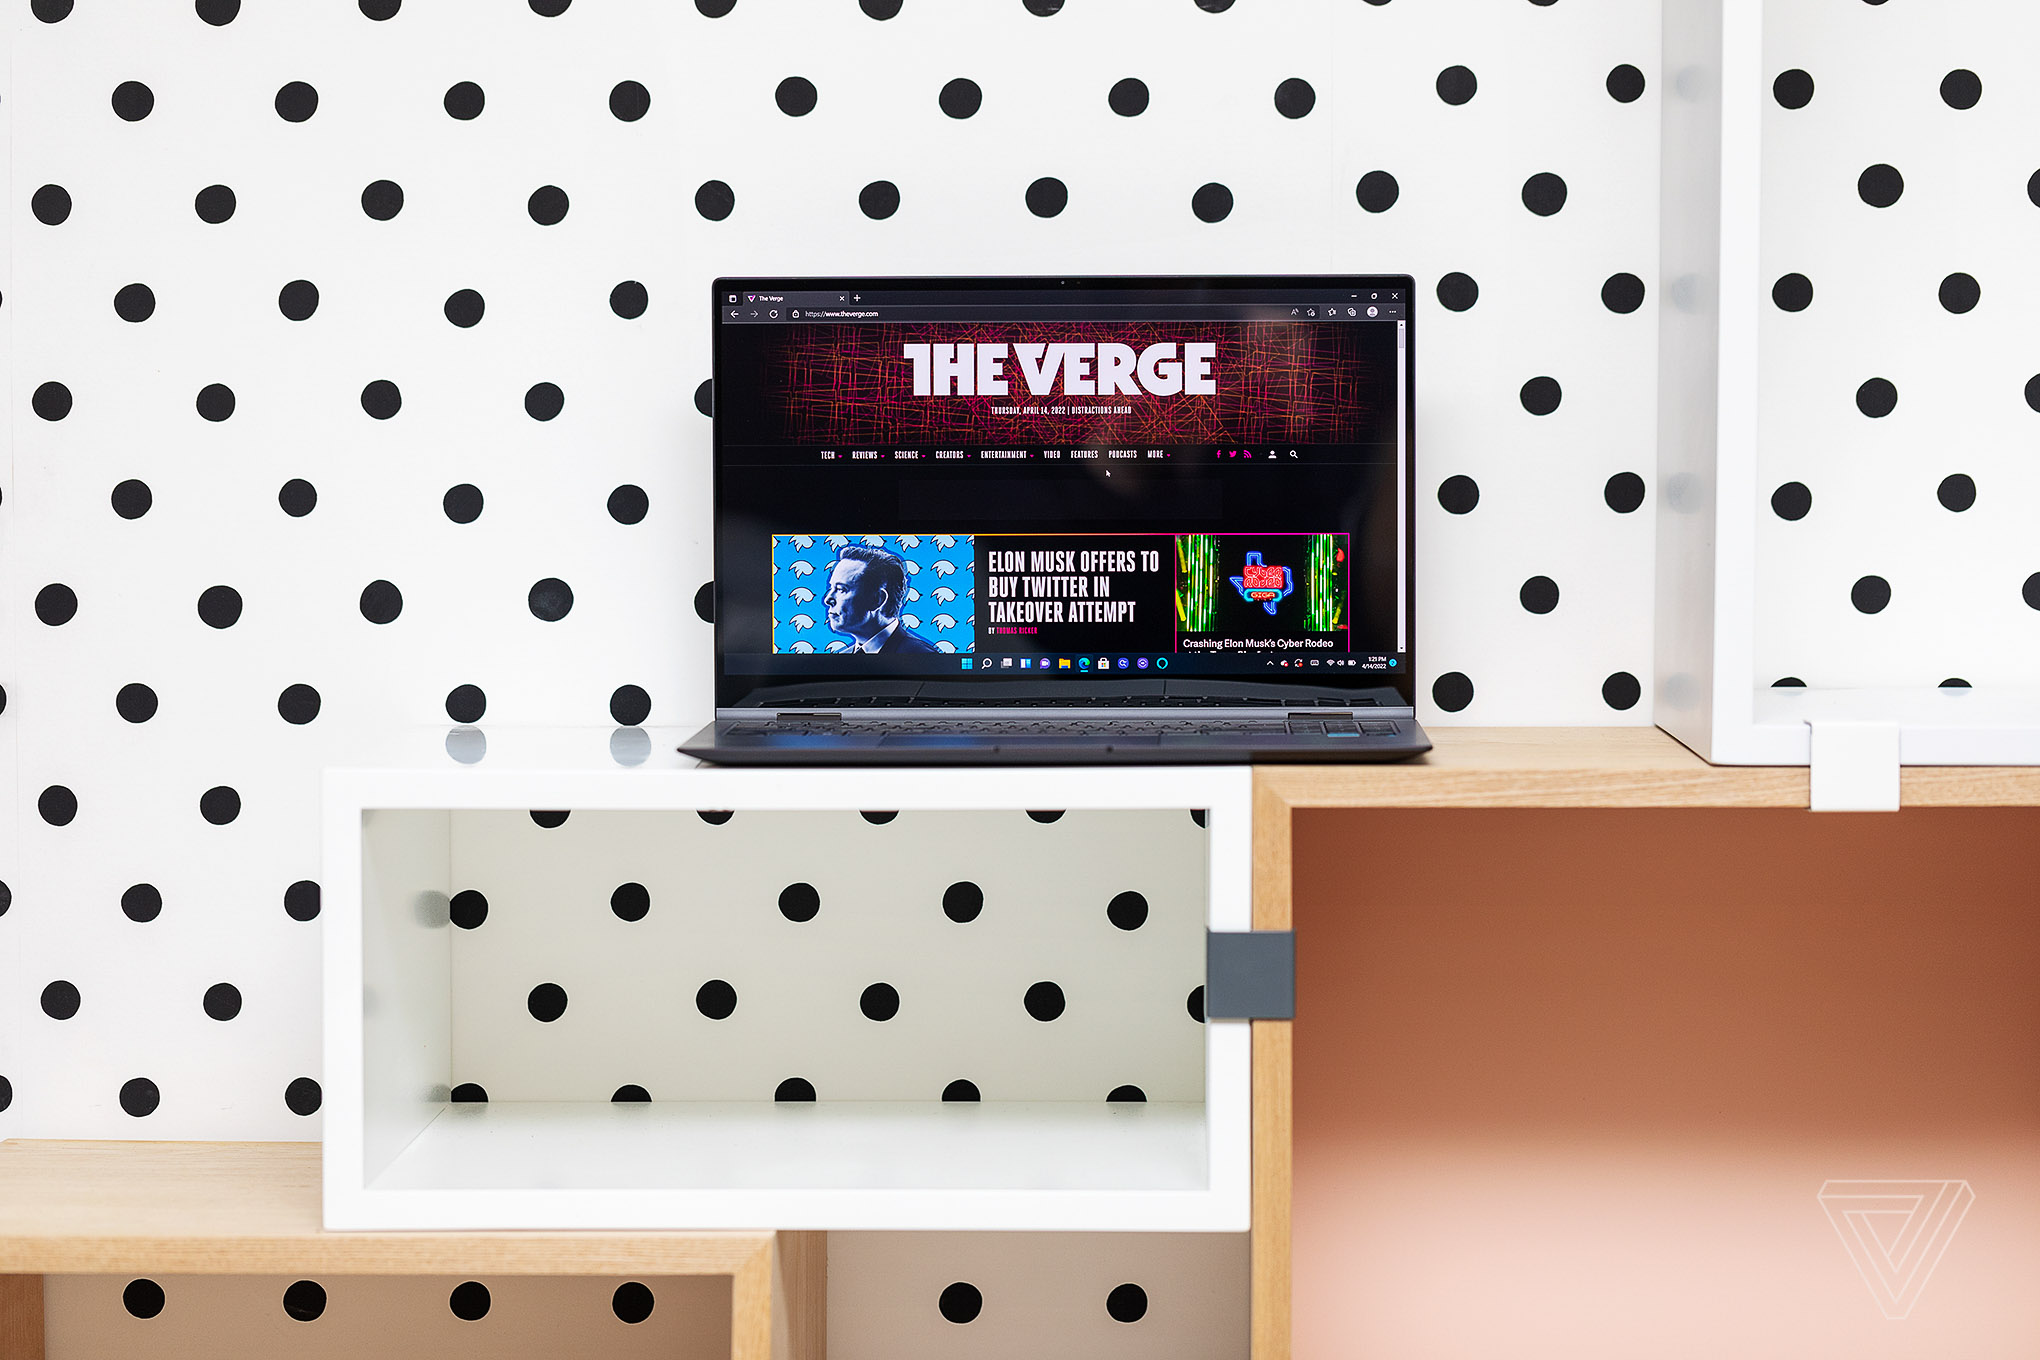 The Samsung Galaxy Book2 Pro 360 in front of polka dot wallpaper. The screen displays The Verge homepage.